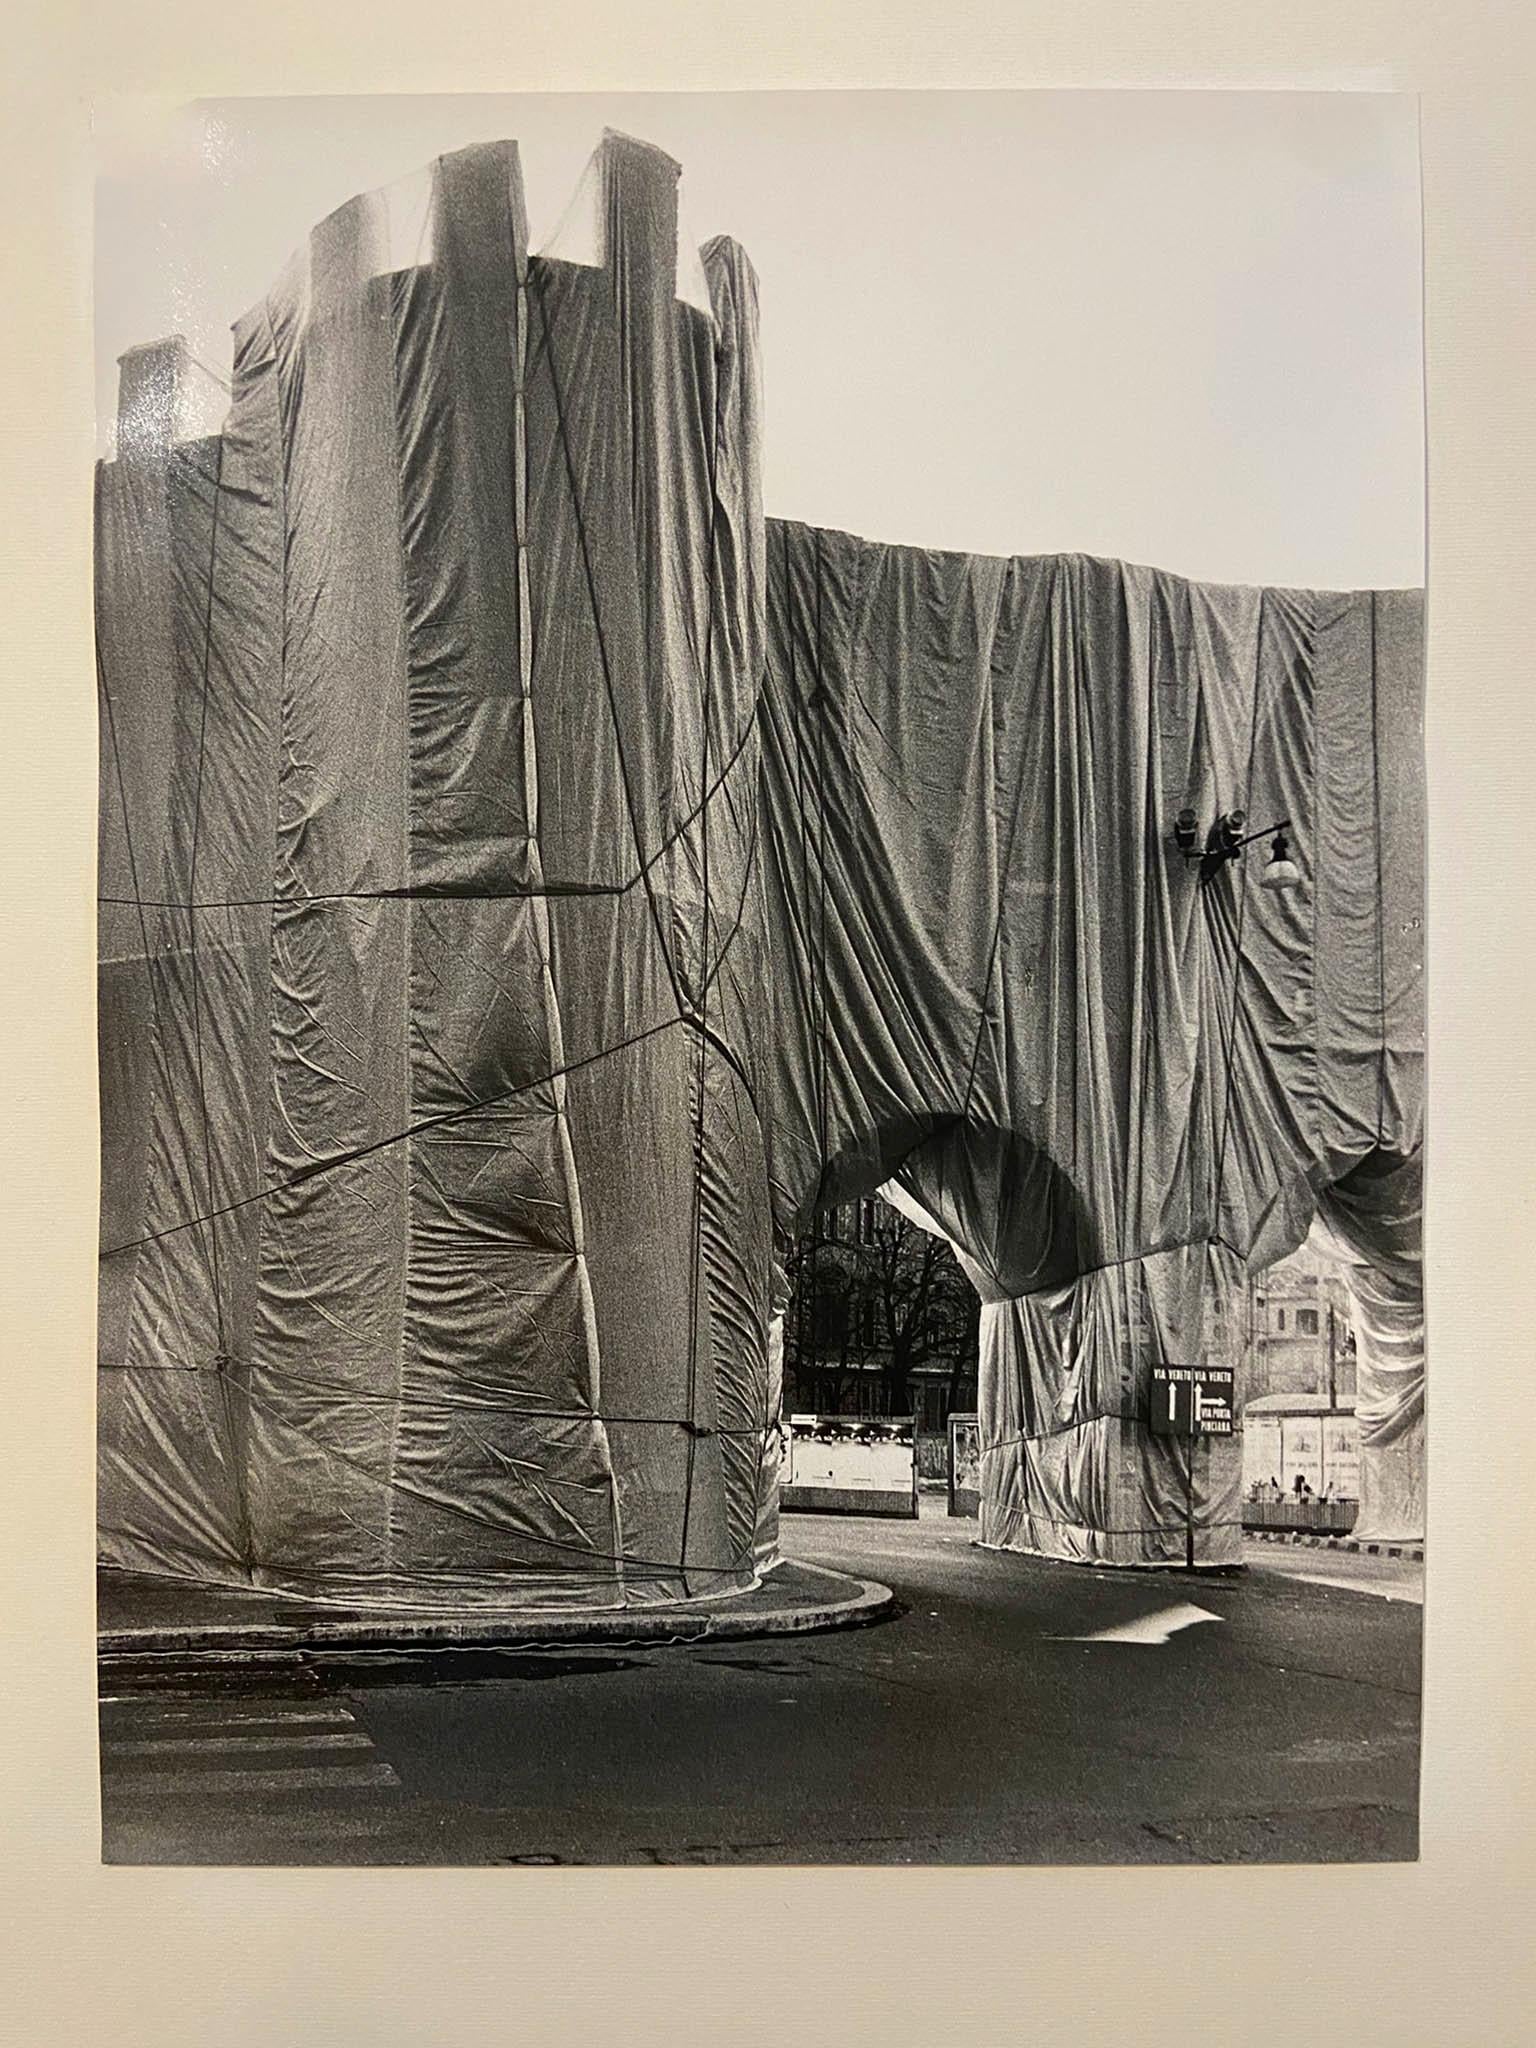 In February and March 1974, for a period of 40 days, a 820-foot long section of the Aurelian Walls was wrapped in polypropylene and rope, covering both sides, the top and the arches of the wall. Forty construction workers completed the temporary